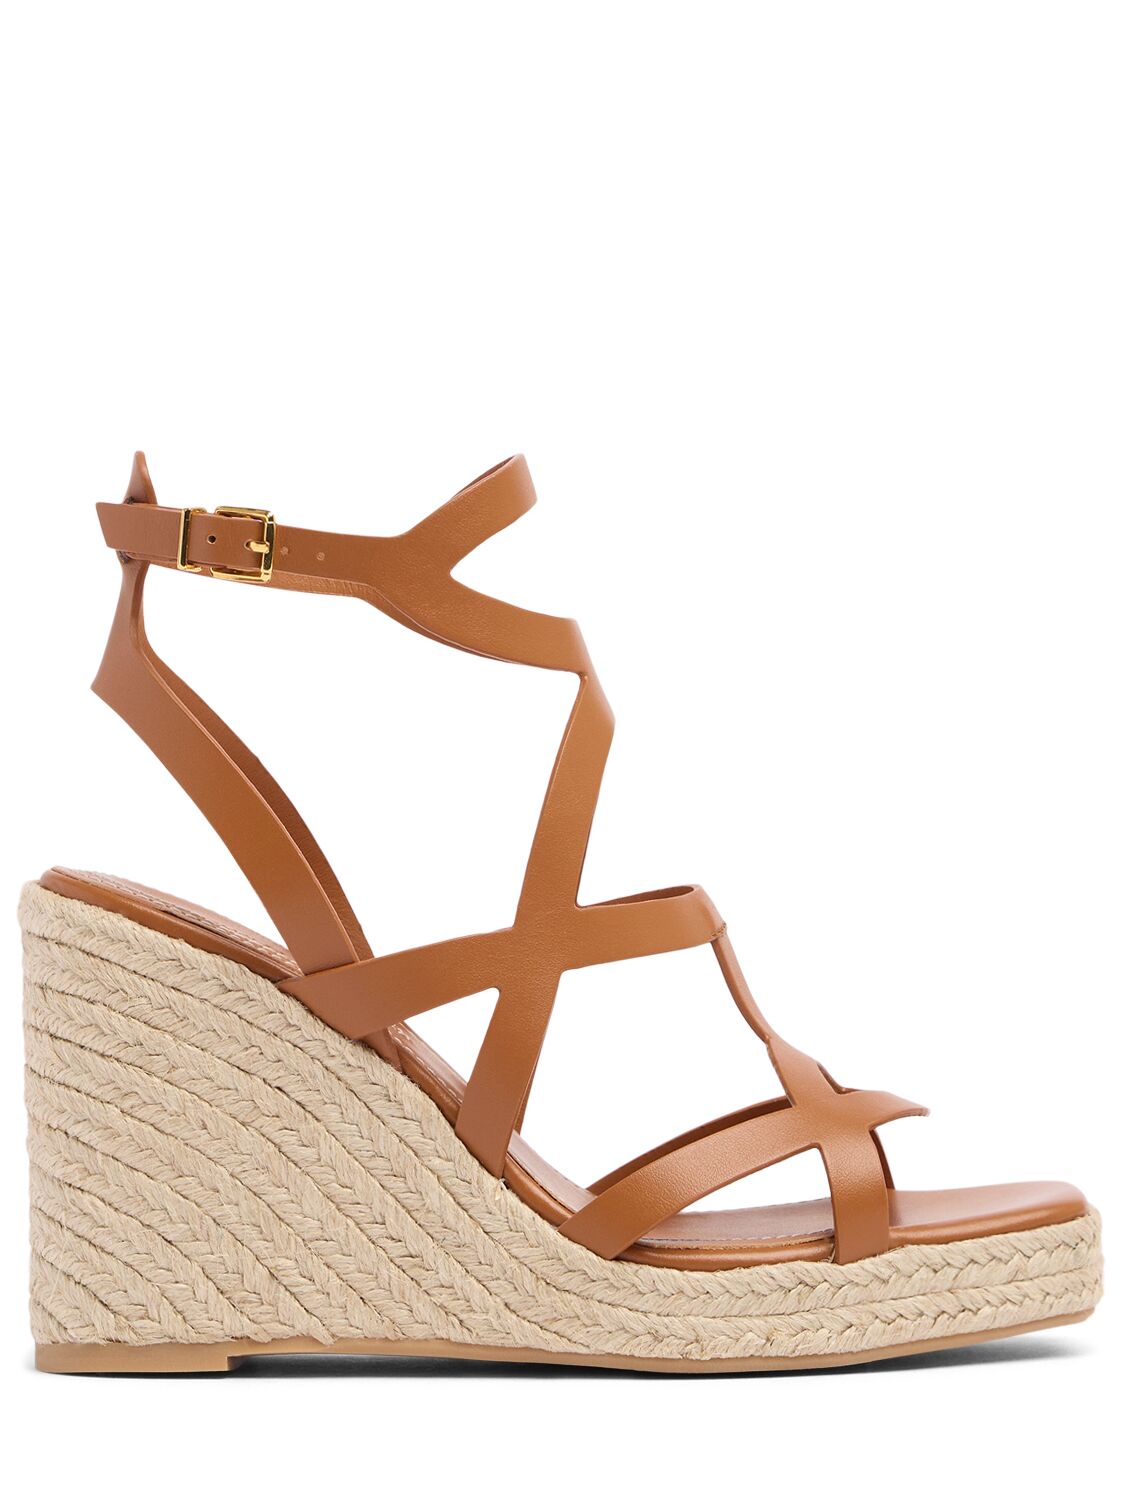 Zimmermann 110mm Bay Leather Wedge Sandals In Tan